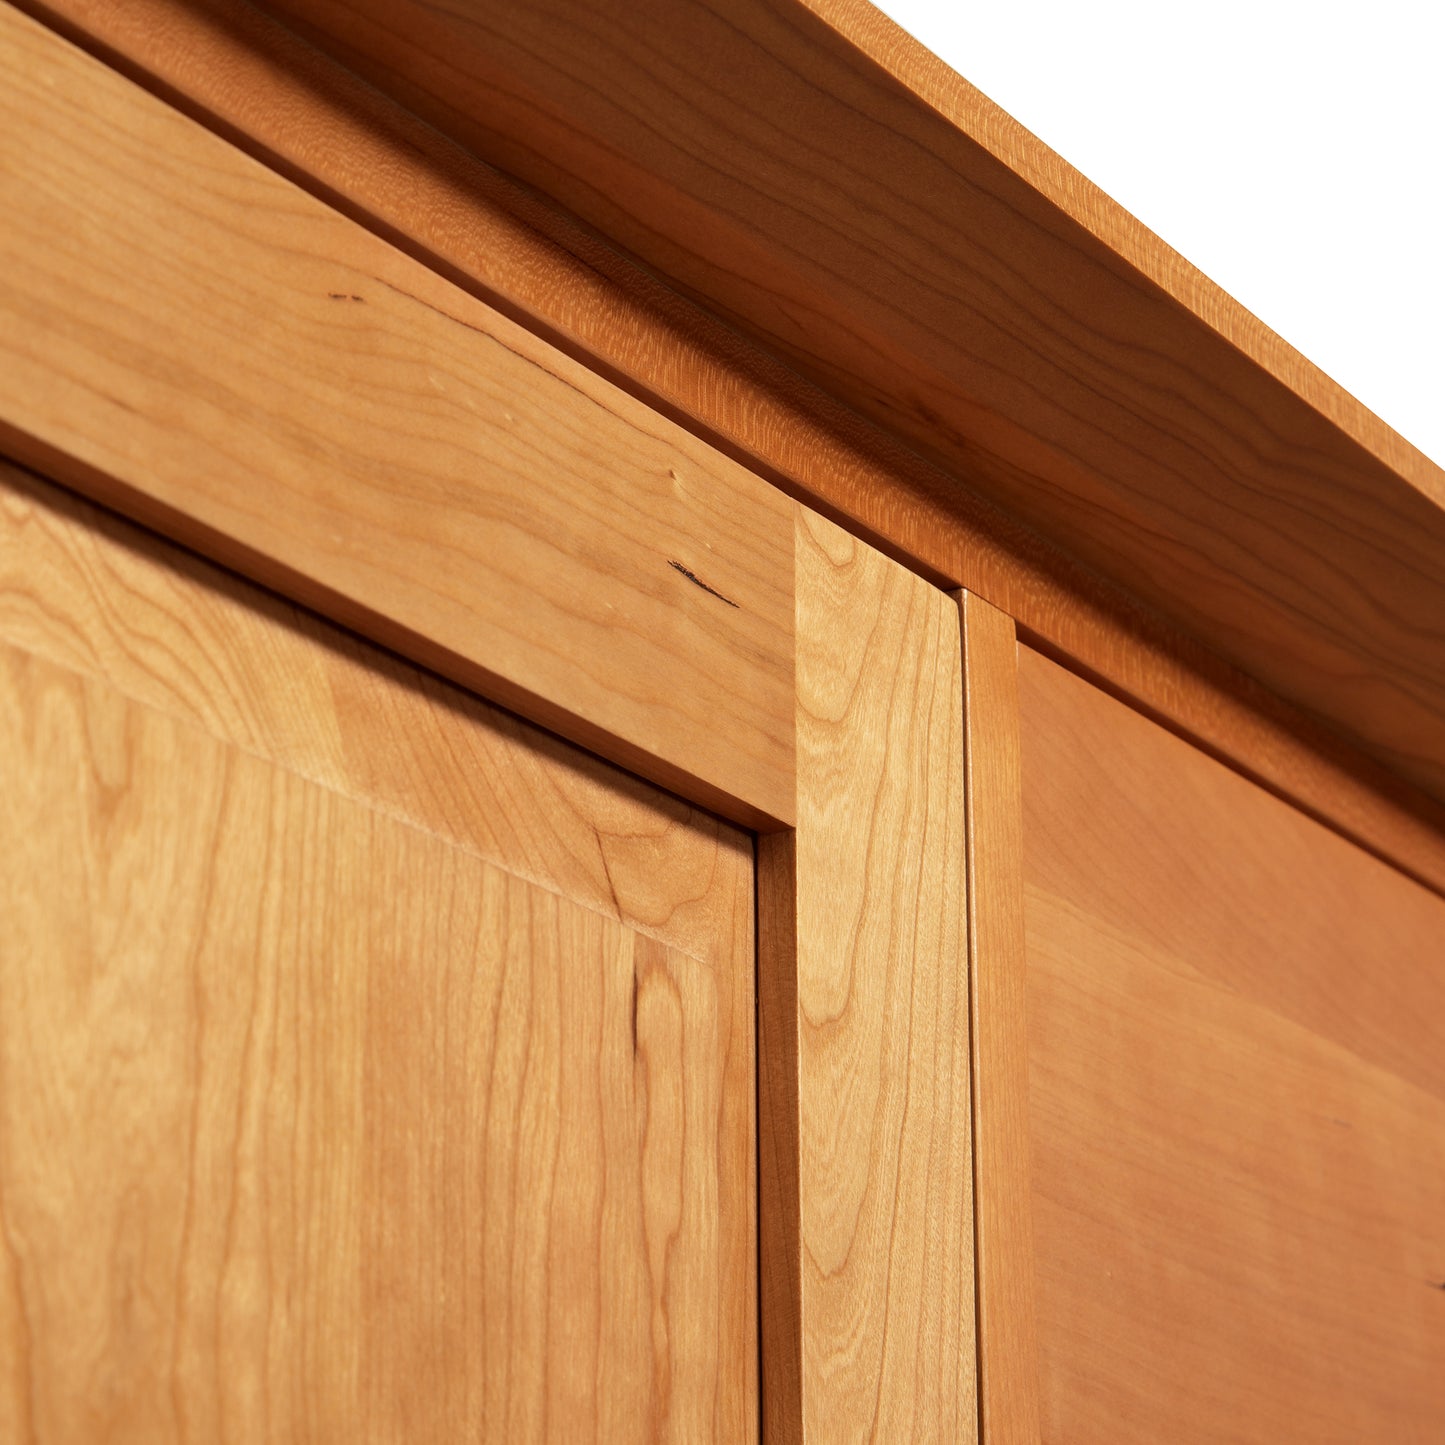 A close up view of a handmade wooden cabinet door in Lyndon Furniture's Classic Shaker Large Buffet Style.